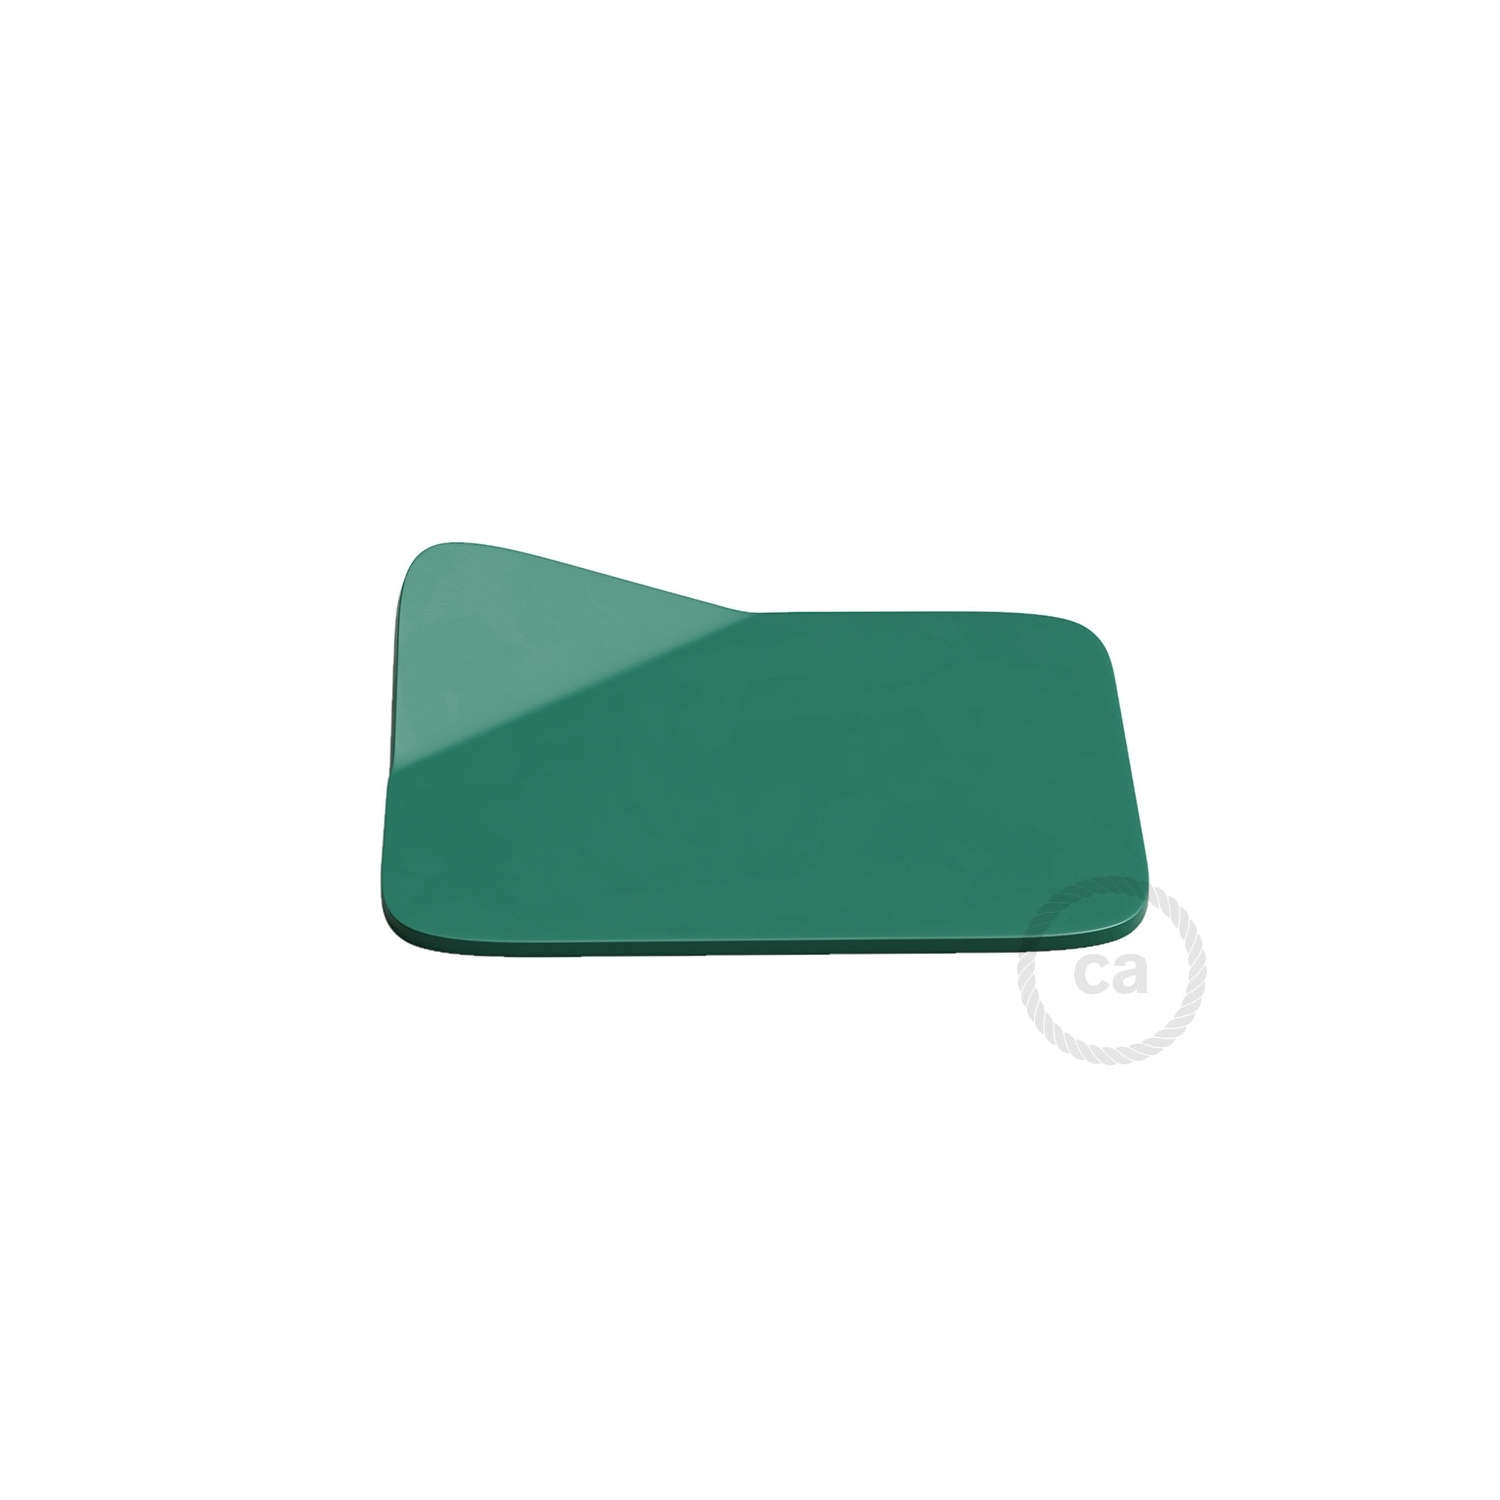 Magnetico®-Base Green, metal base for smooth surfaces for Magnetico®-Plug